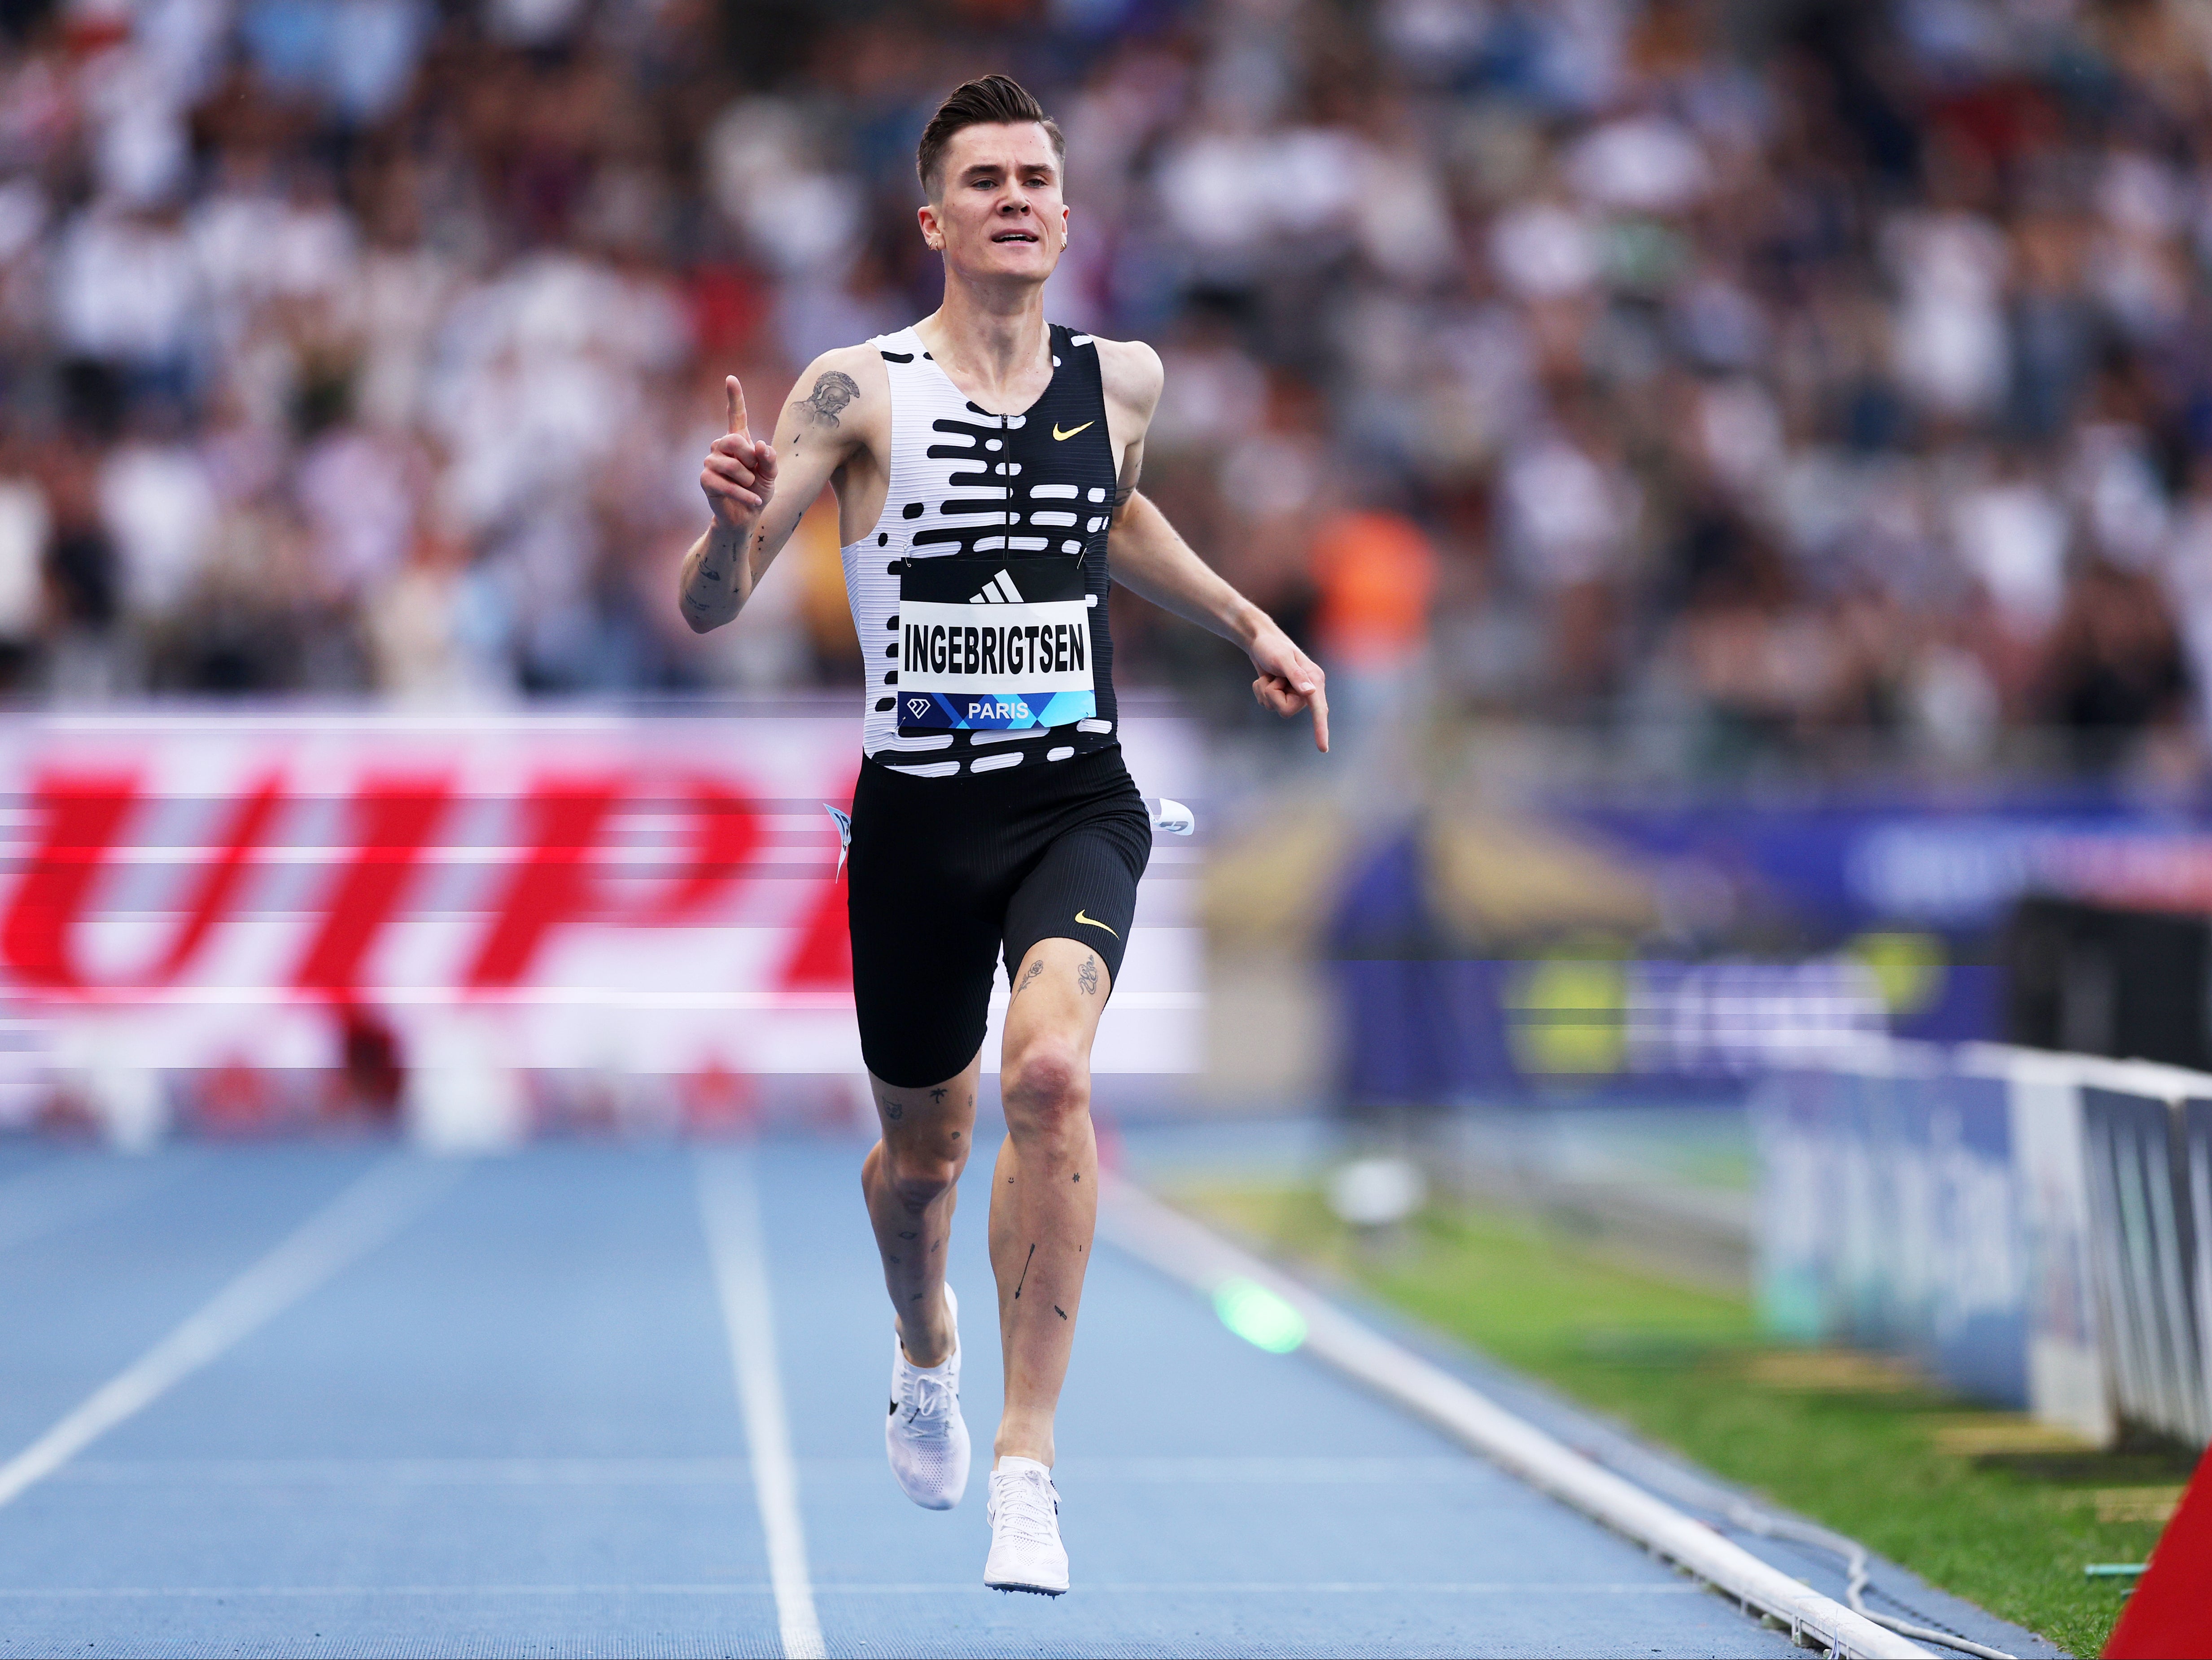 Middle distance star Jakob Ingrebrigtsen will hope for a strong performance on home soil in Oslo